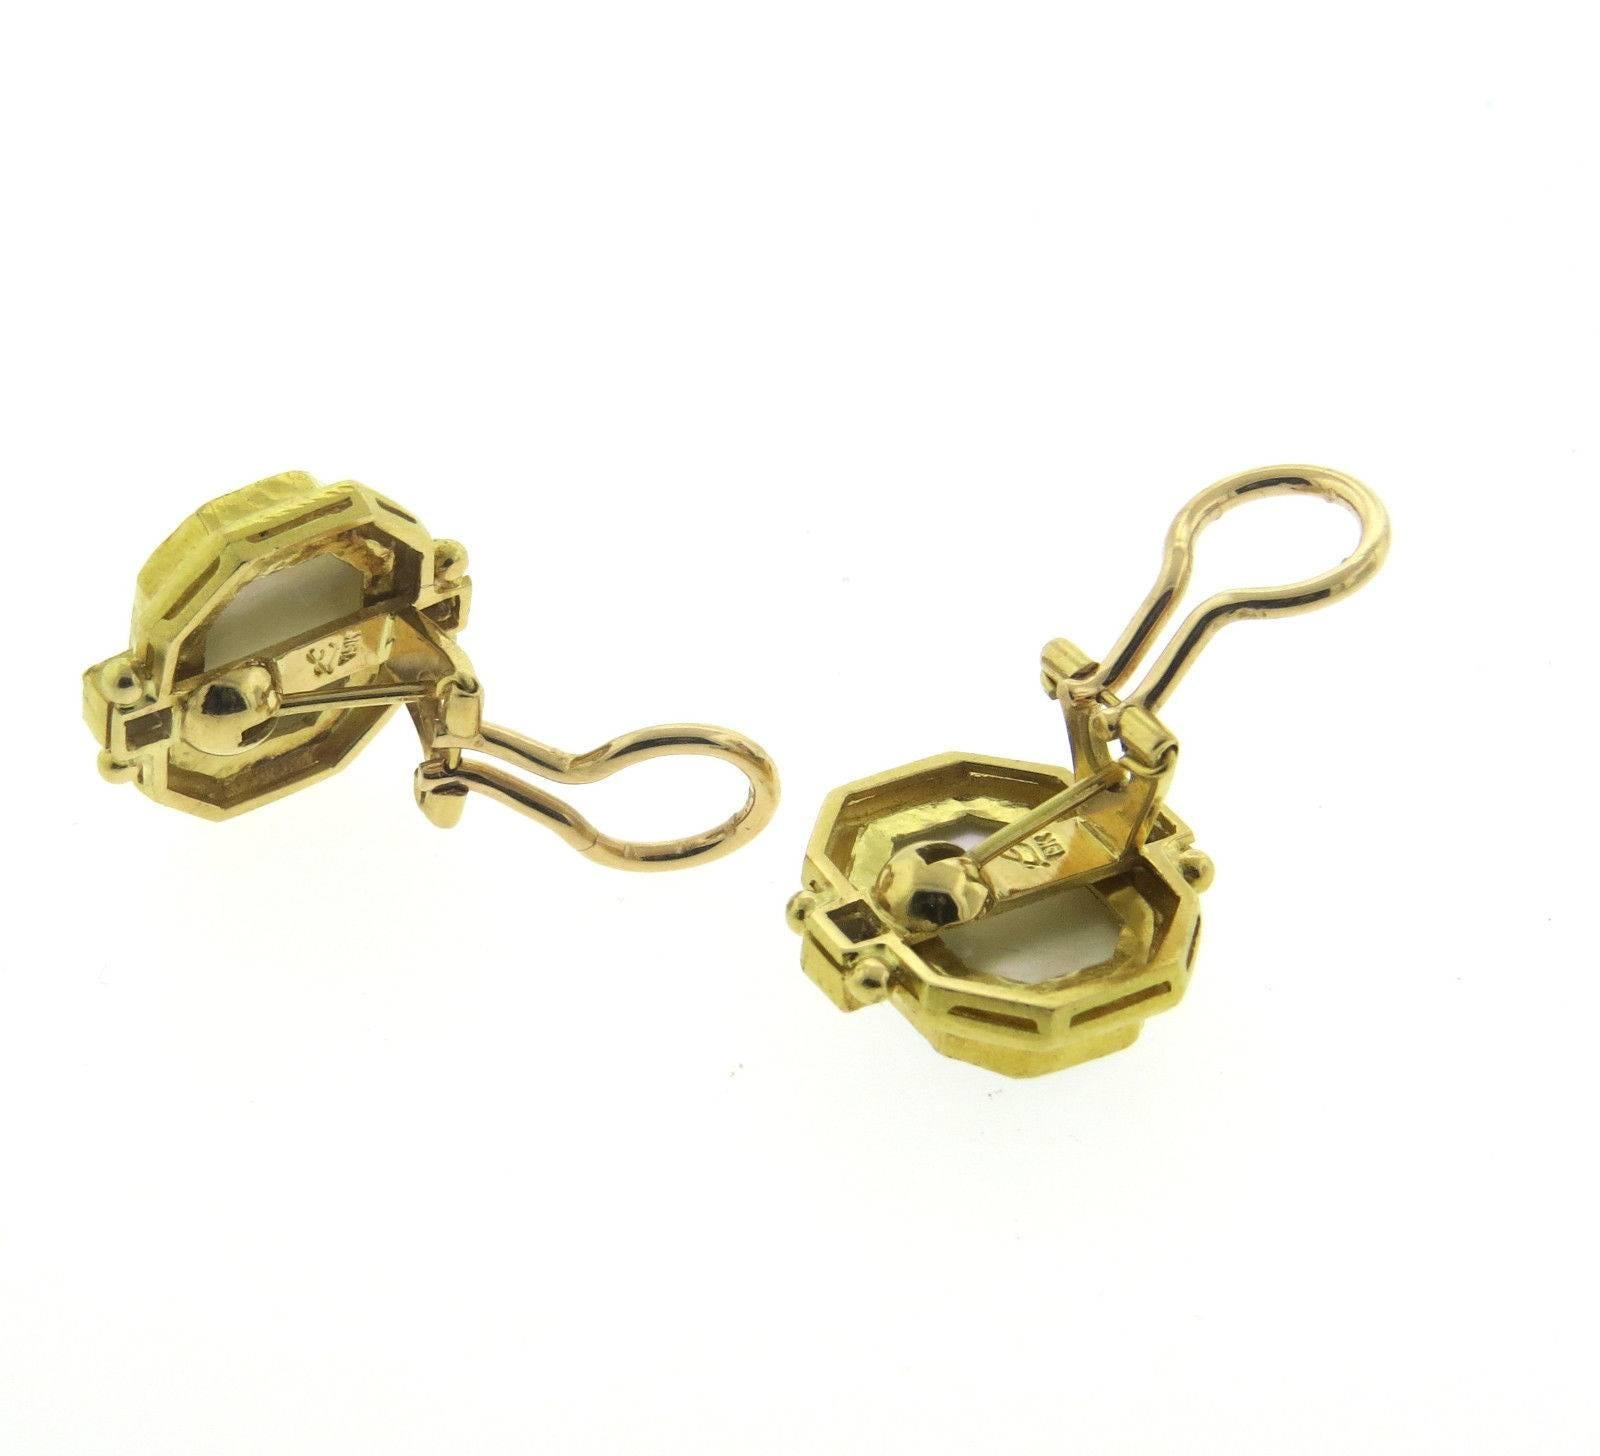 A pair of 19k yellow gold earring set with venetian glass intaglio surrounded by iolite stones.  Crafted by Elizabeth Locke, the earrings measure 20mm x 19mm and weigh 17 grams.
